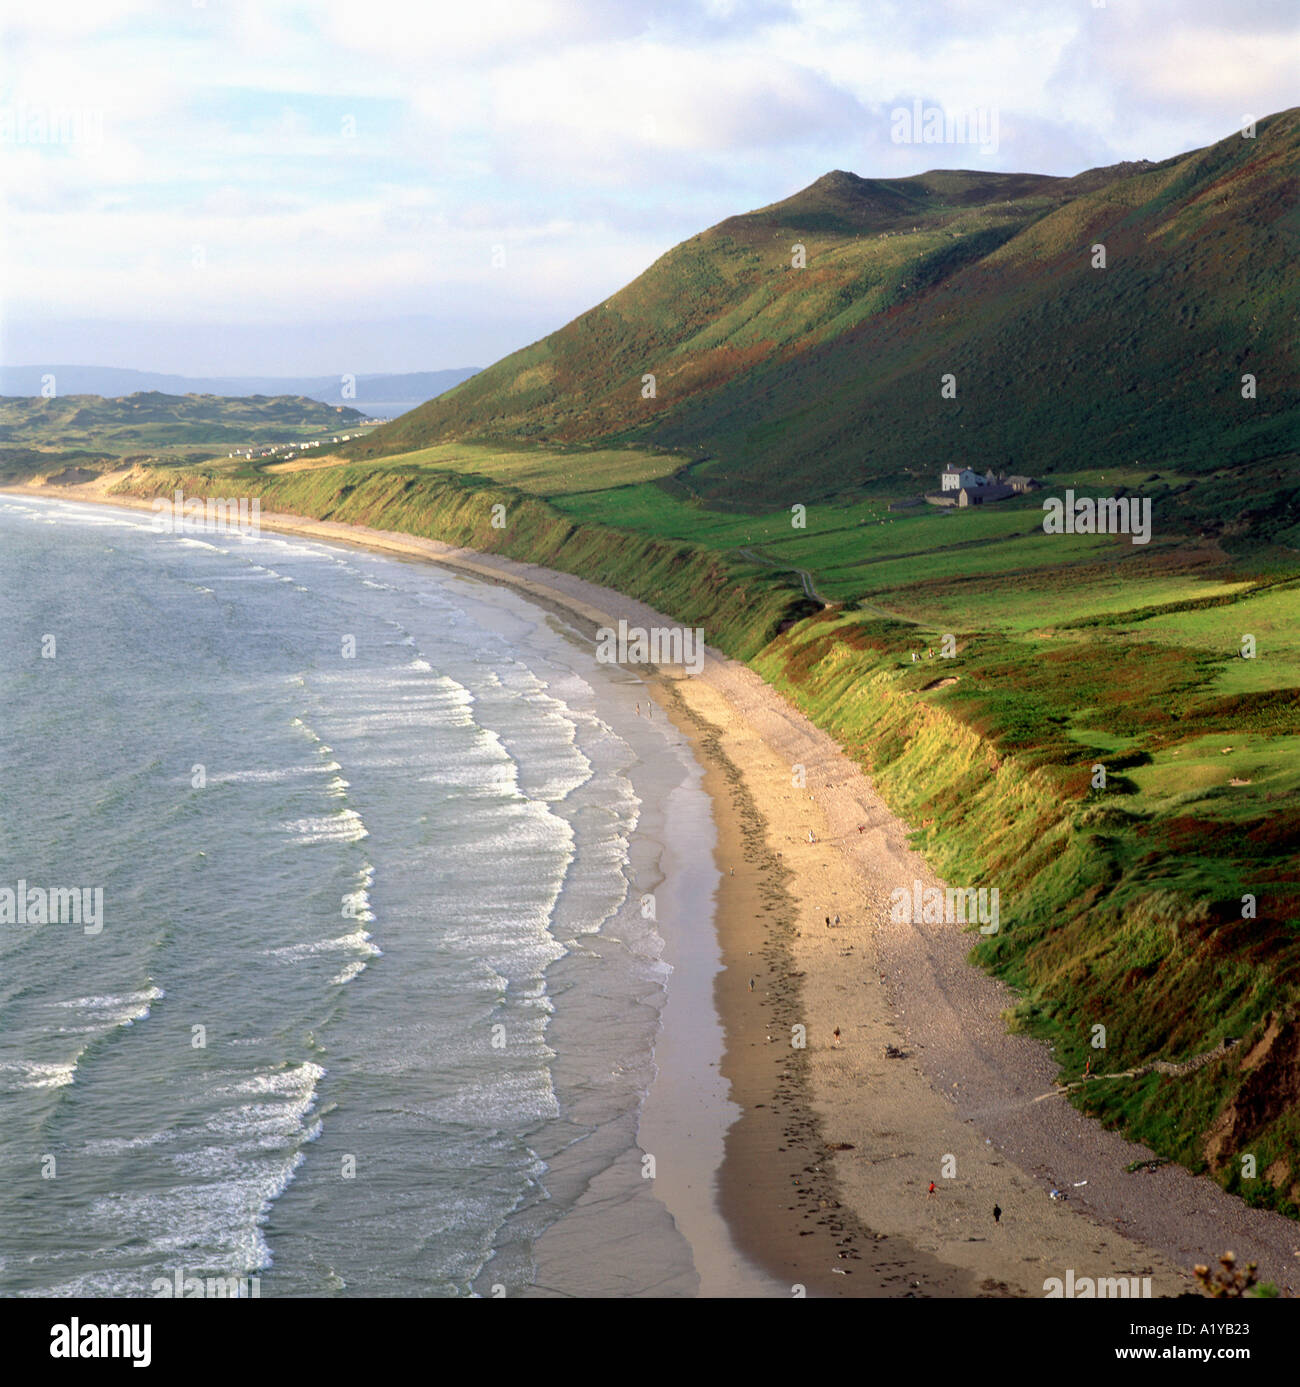 A view of Rhossili Bay one of top ten beaches in Britain on Gower Peninsula near Swansea West Glamorgan in Wales, UK  KATHY DEWITT Stock Photo